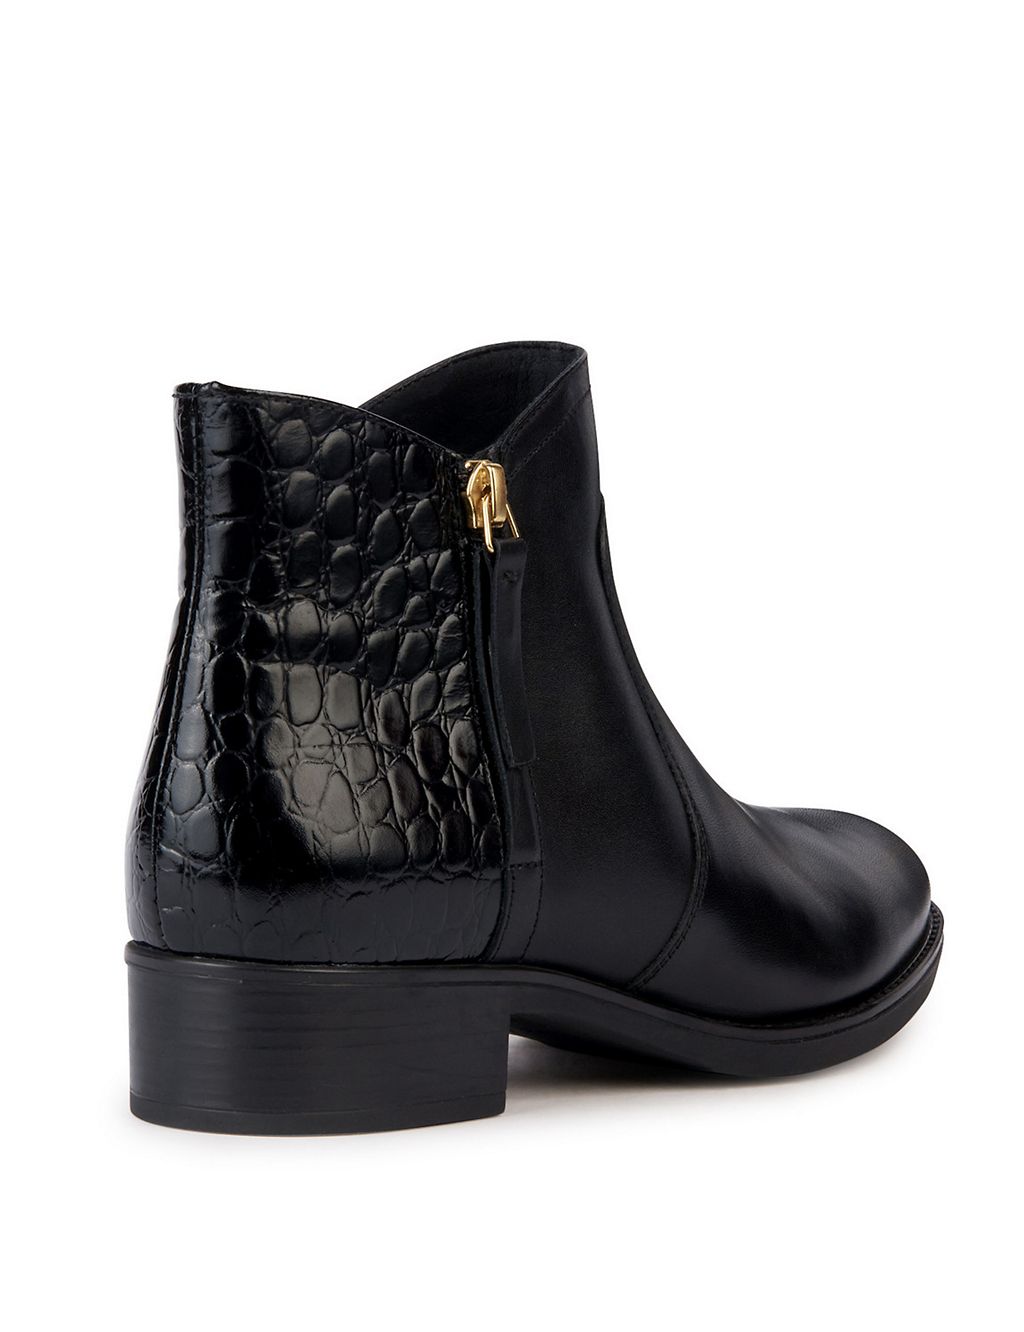 Leather Block Heel Ankle Boots 4 of 6